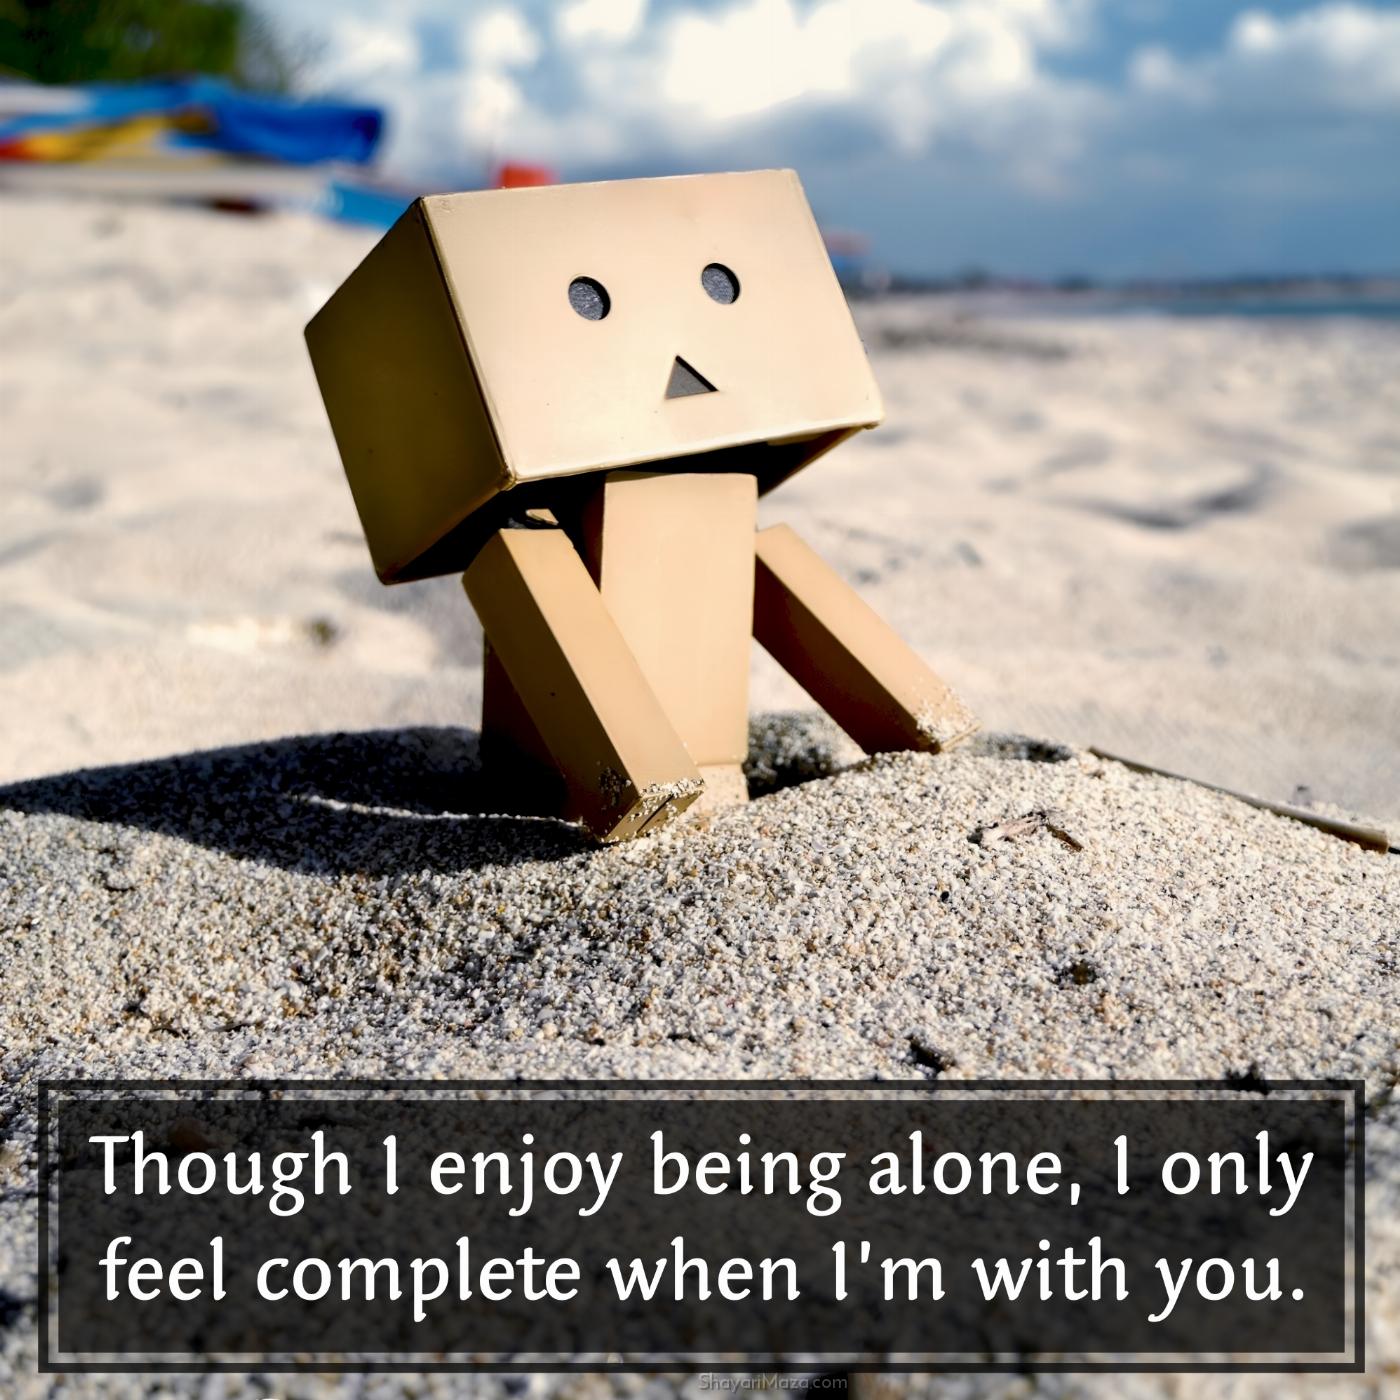 Though I enjoy being alone I only feel complete